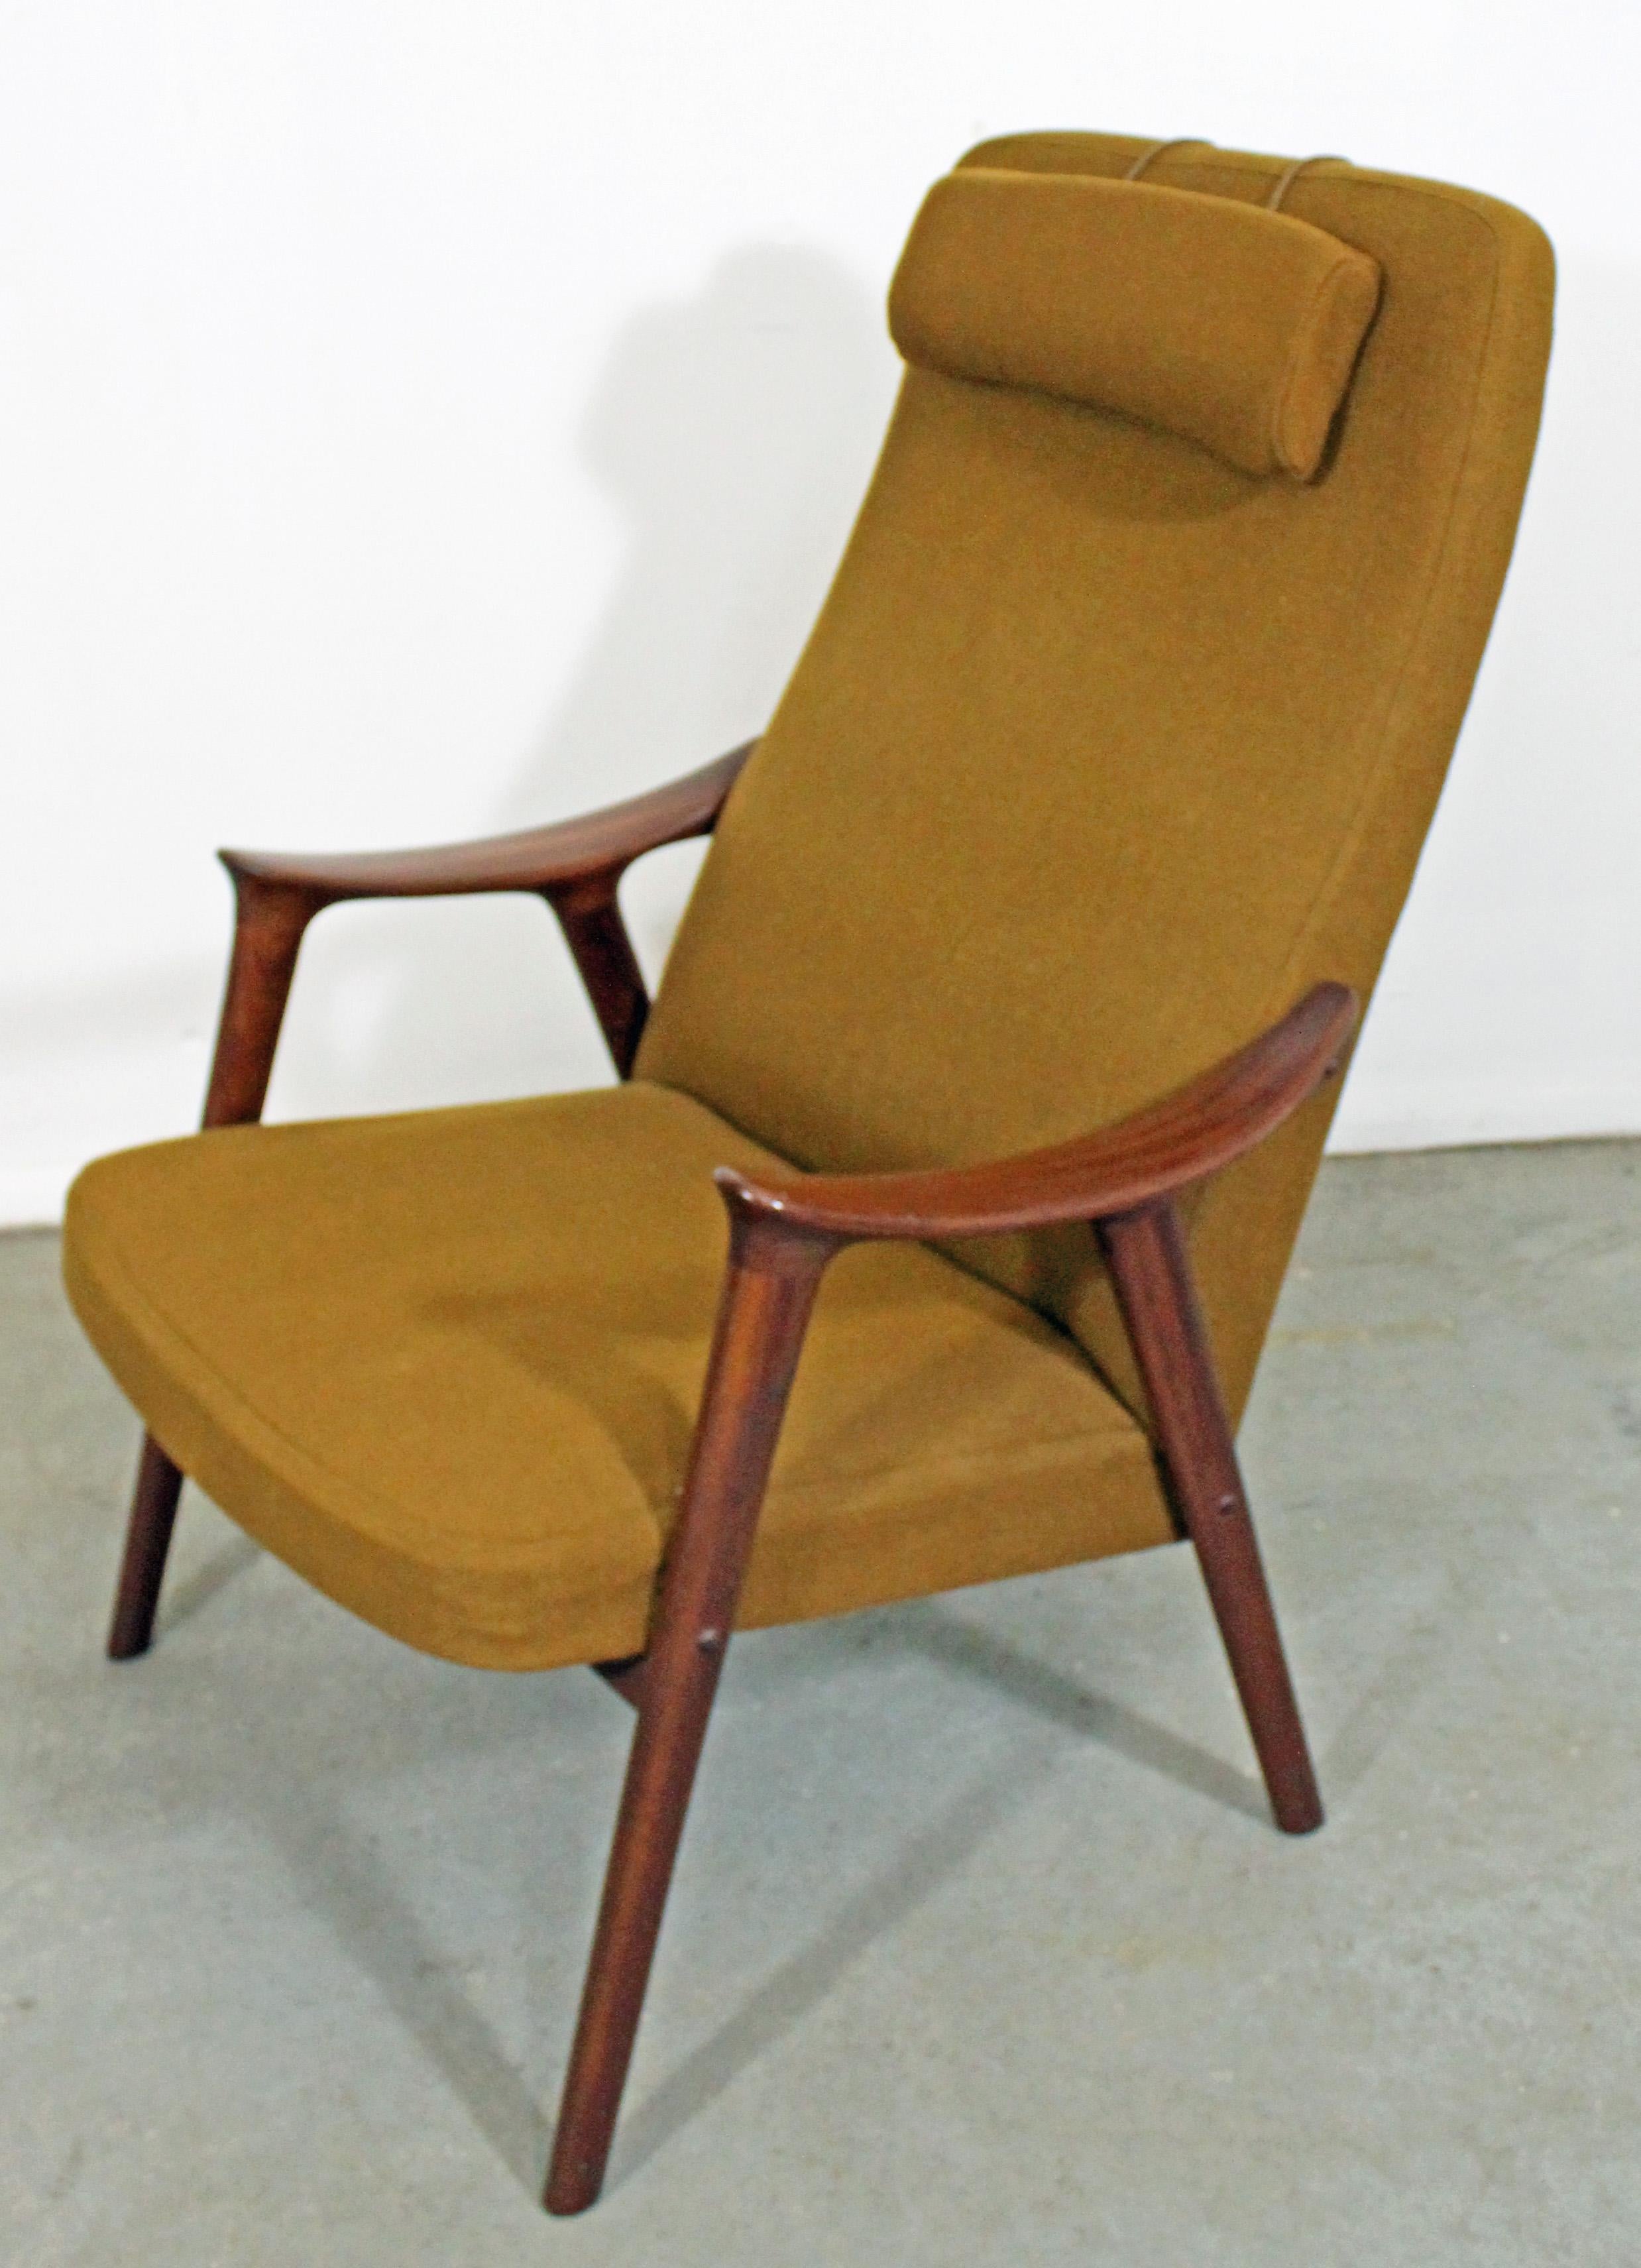 What a find. Offered is a 1950s Scandinavian Modern 'Klarinett' lounge chair by Møre Lenestol Fabrikk A/S. It is made of teak wood with a newly re-cushioned and removable, weighted headrest. It is in decent vintage condition, showing some age wear